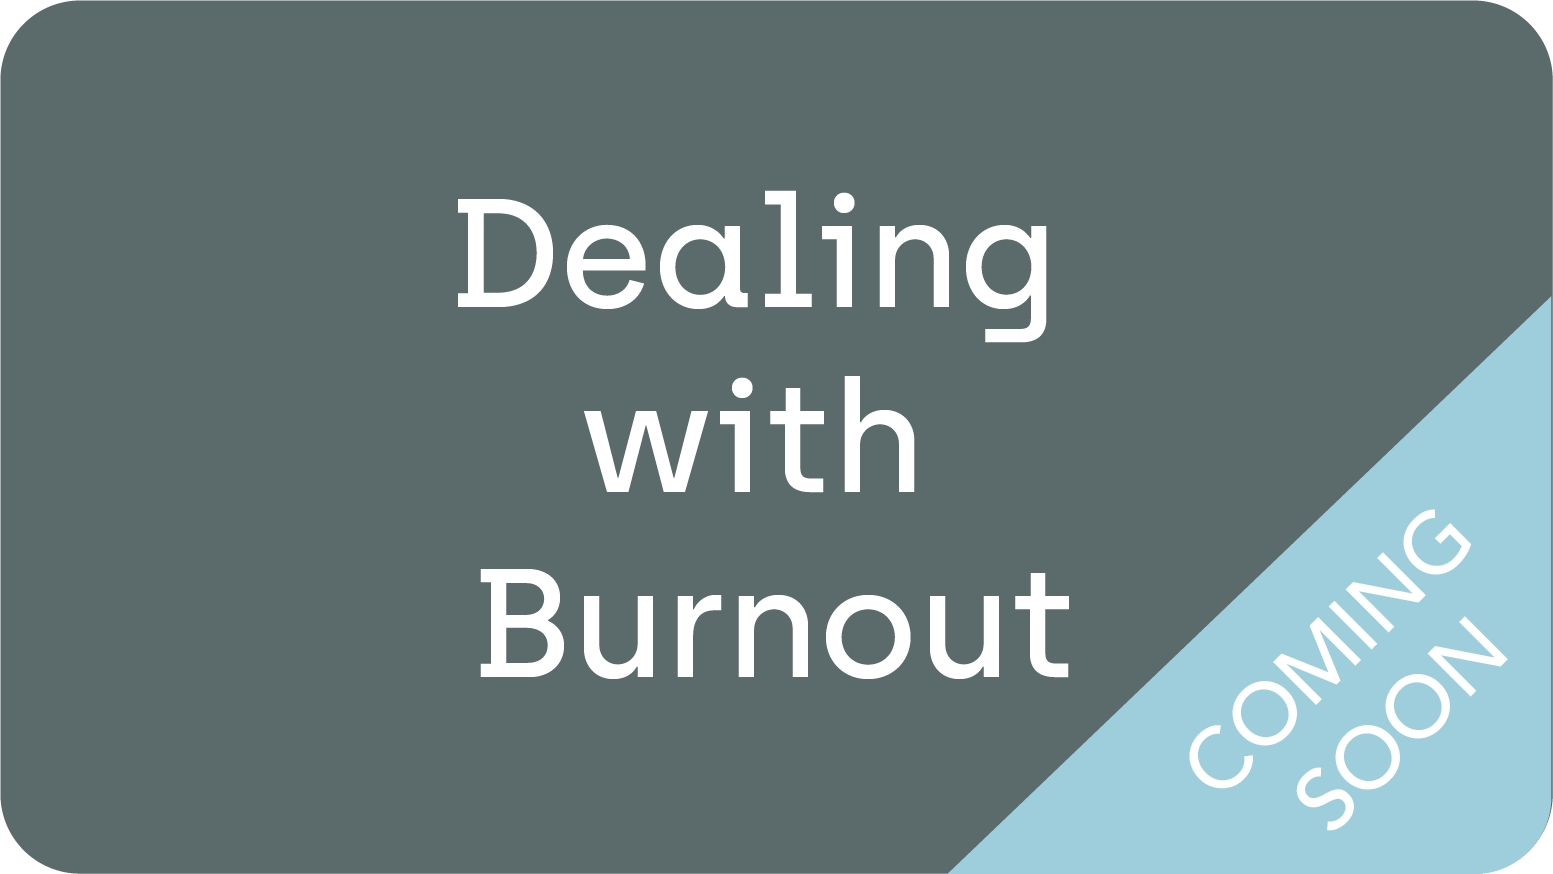 Dealing with Burnout